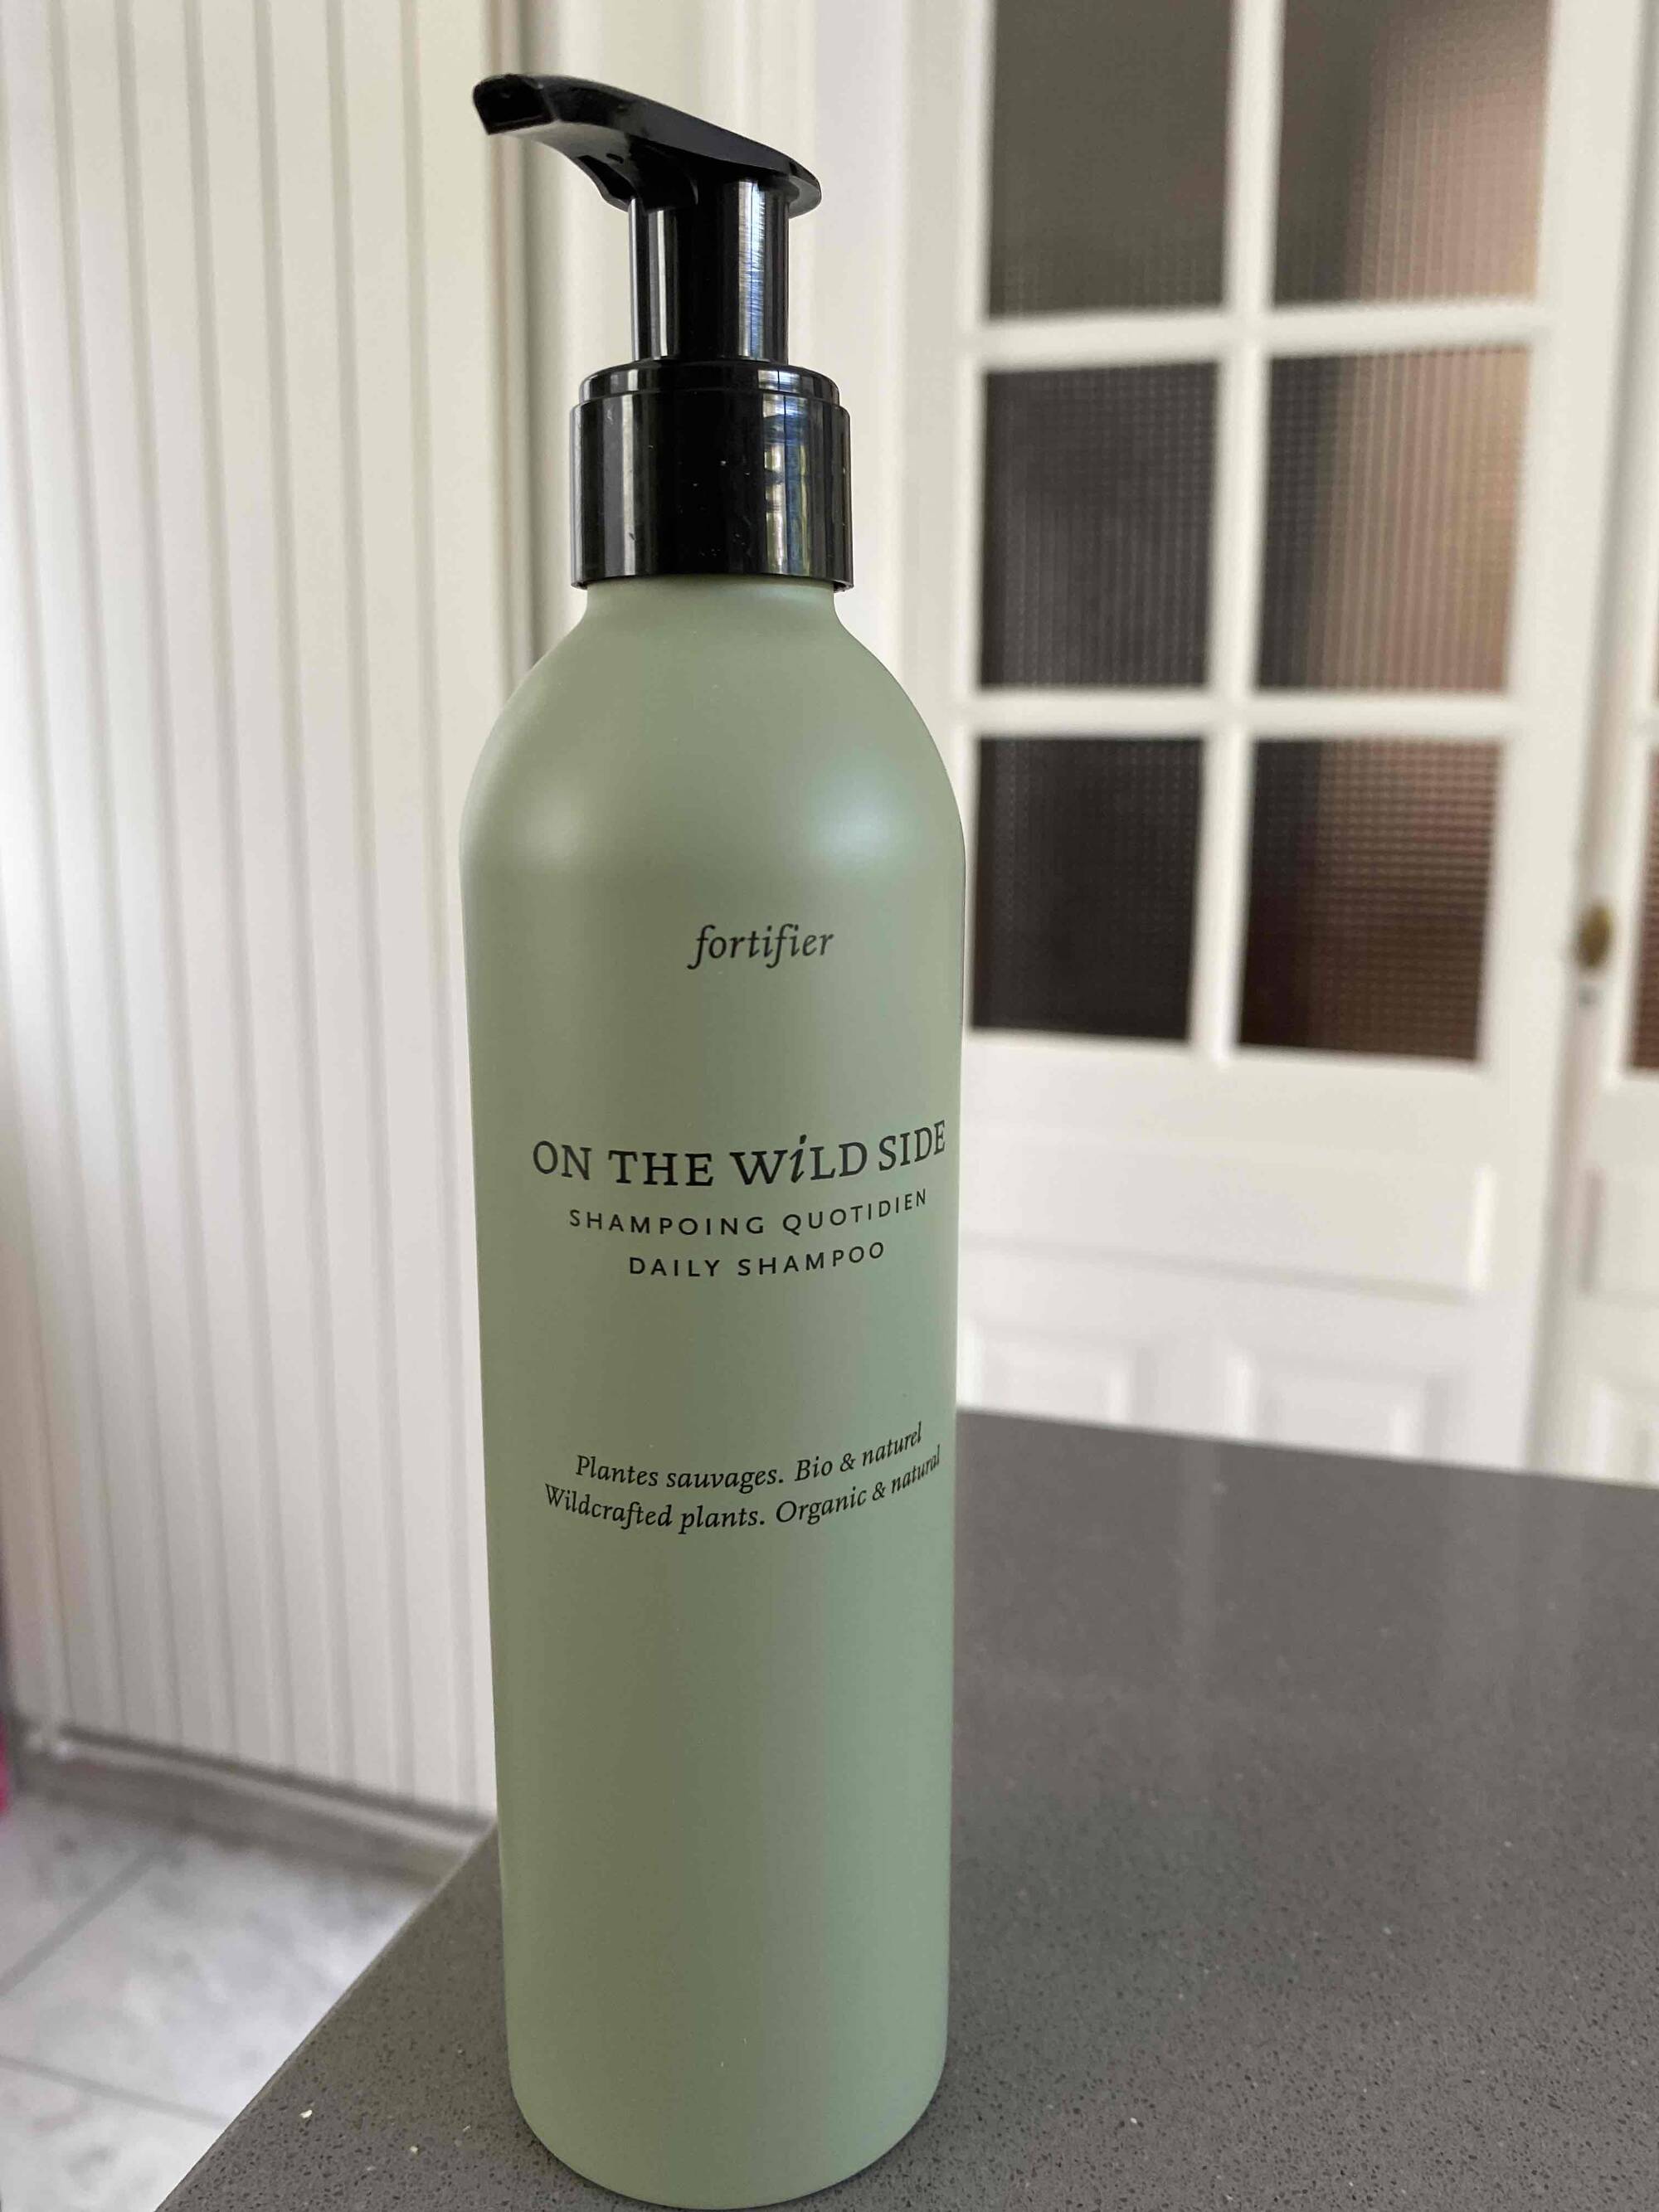 ON THE WILD SIDE - On the wilde side - Shampoing quotidien